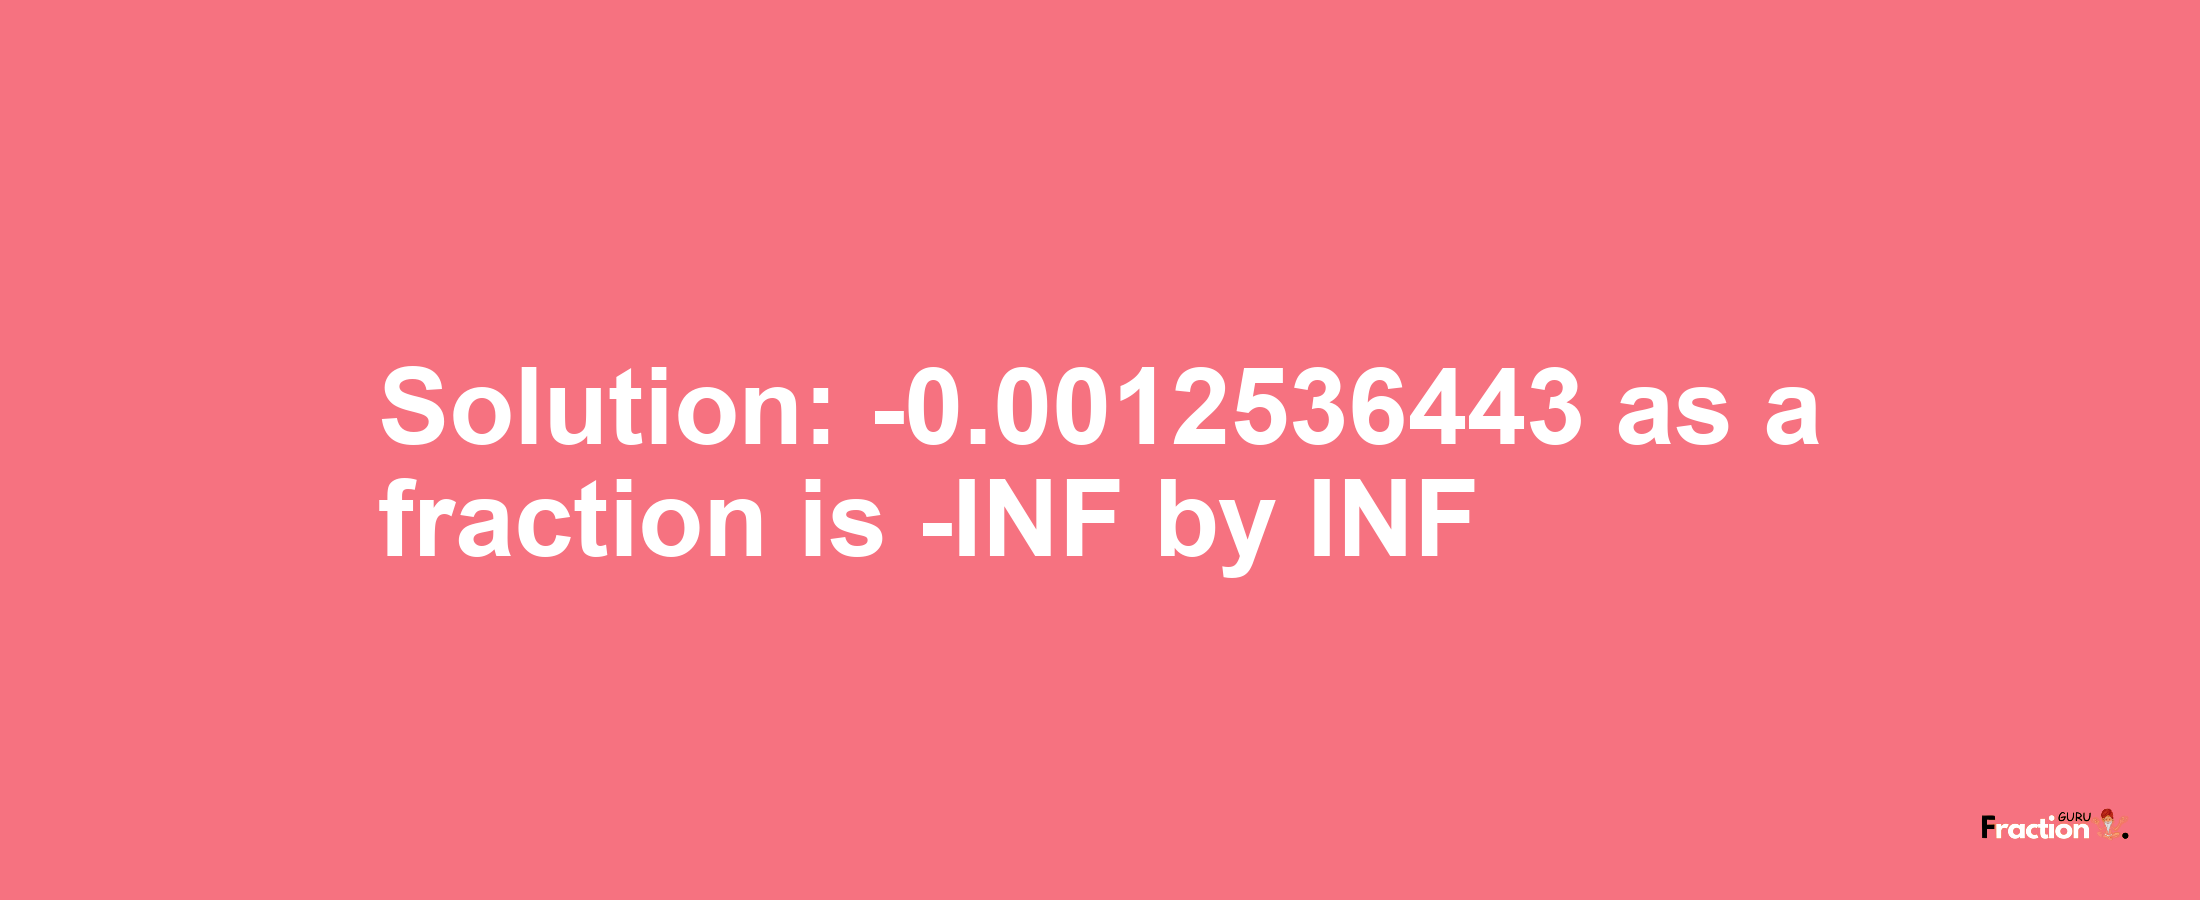 Solution:-0.0012536443 as a fraction is -INF/INF